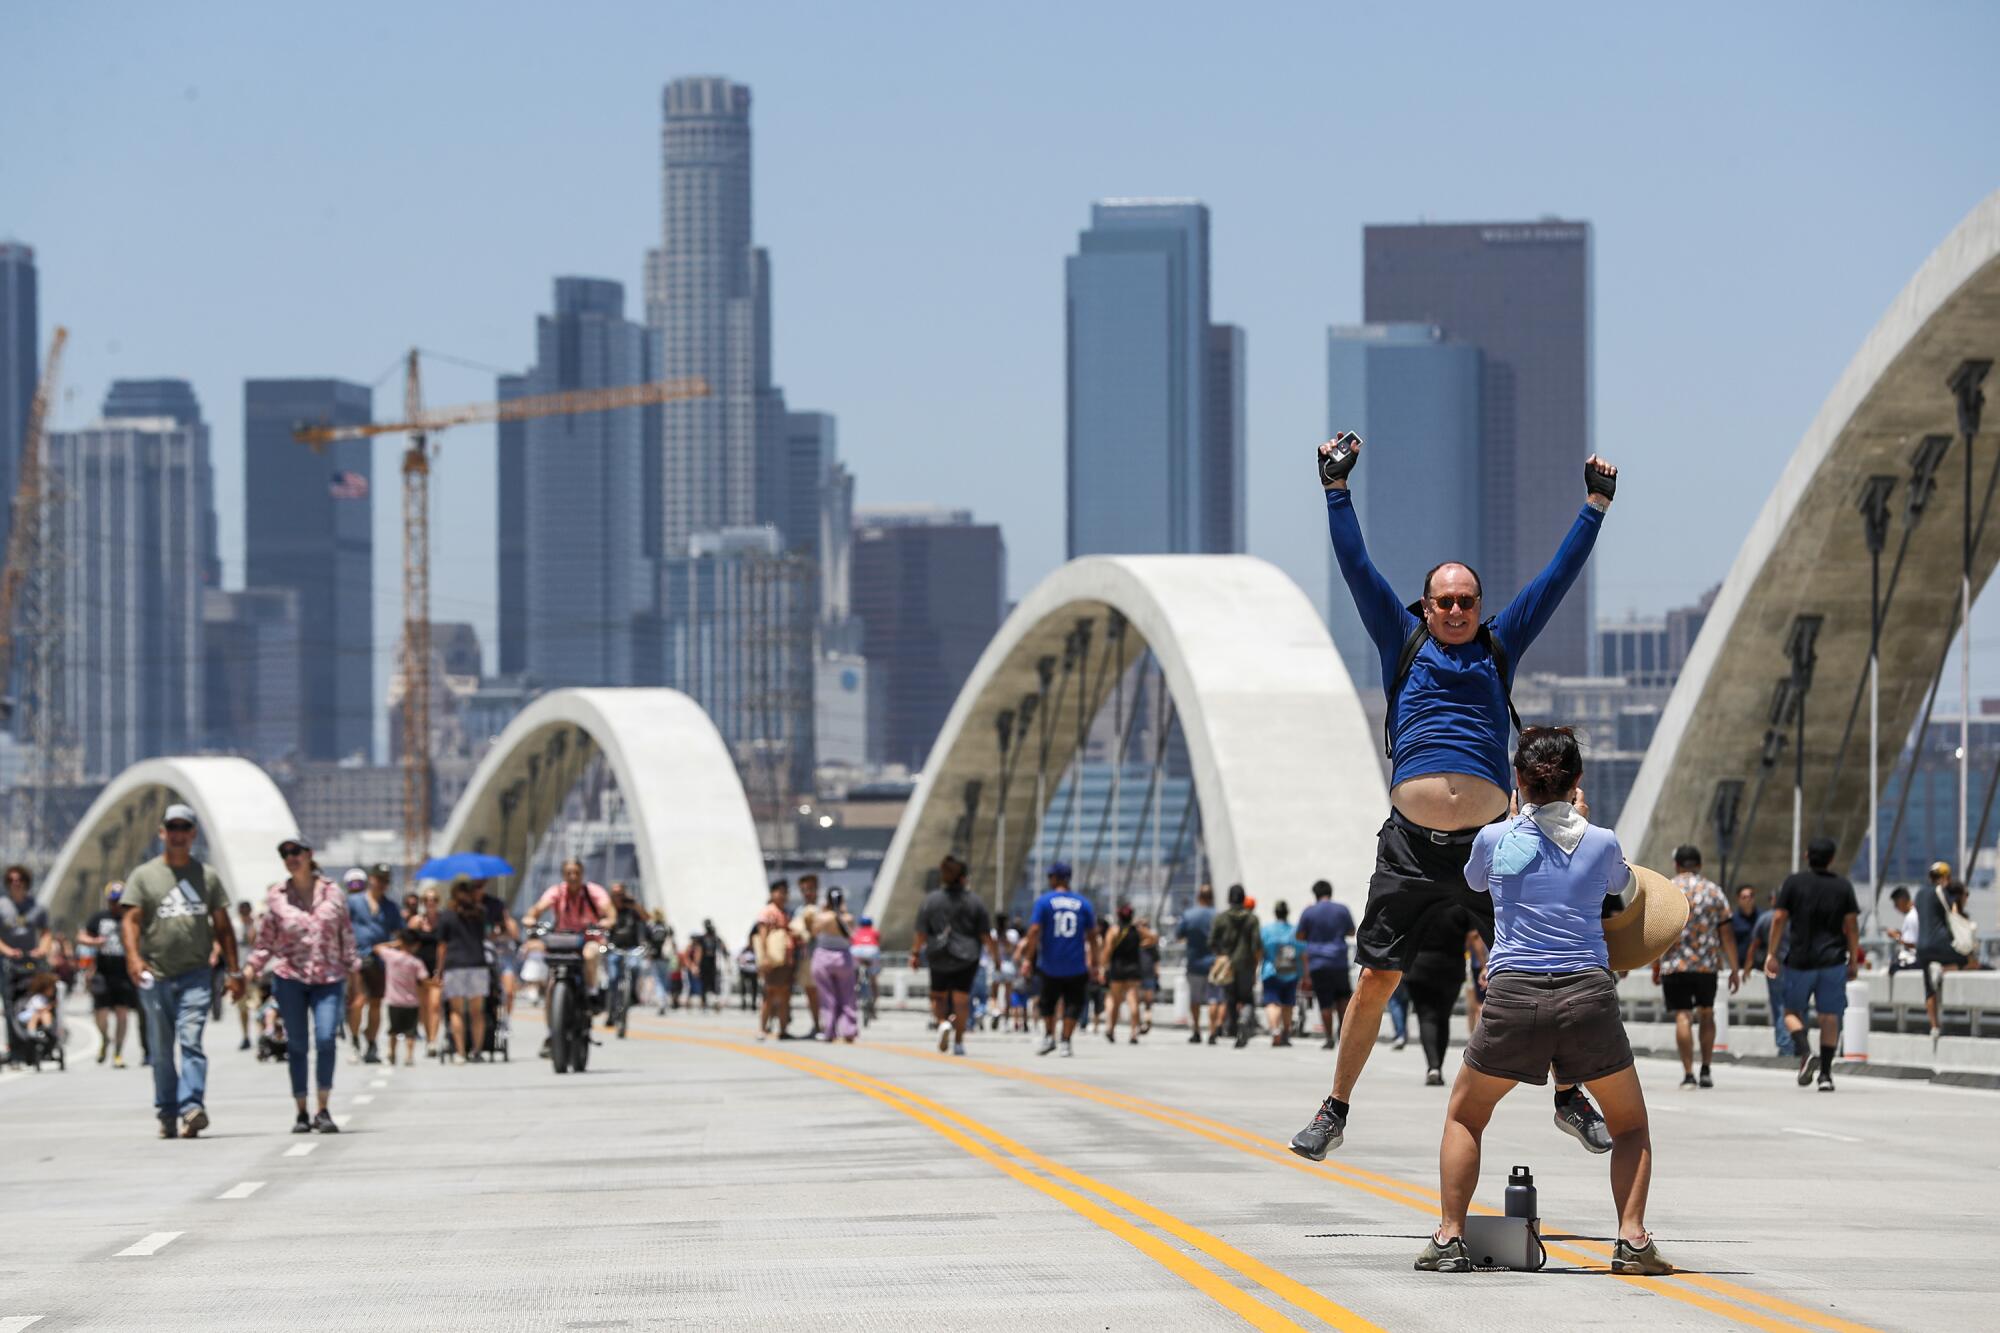 The 6th Street Viaduct was open only to pedestrians and bicycles through 4 p.m. Sunday